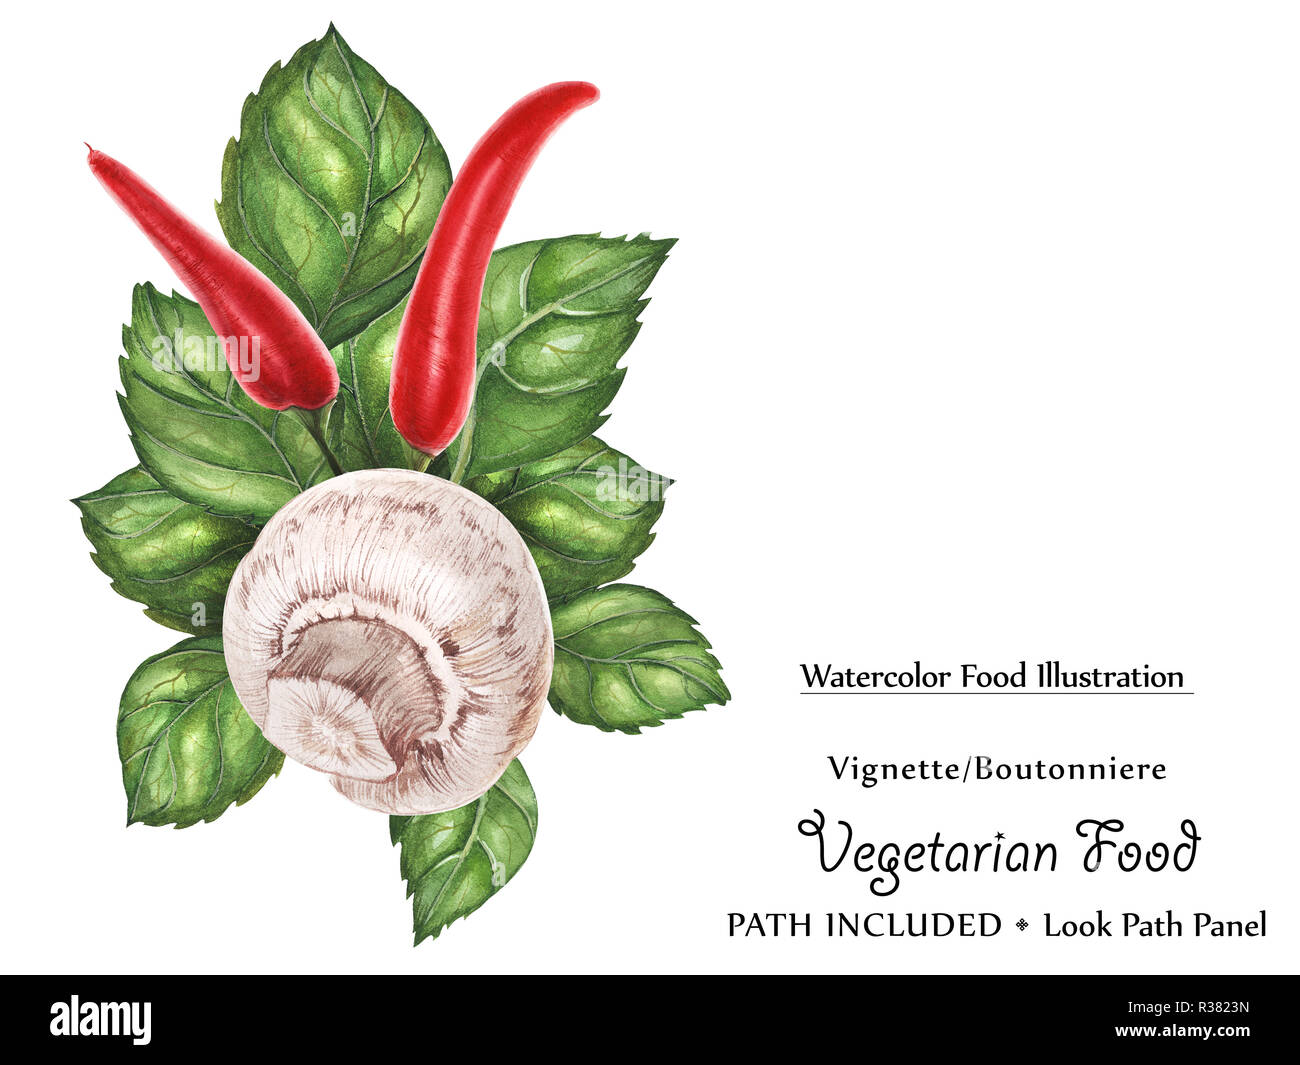 Watercolor vegan vignette biutonniere by freshness green basil leaves, chili peppers and champignon. Isolated, clipping path included, vegan design Stock Photo